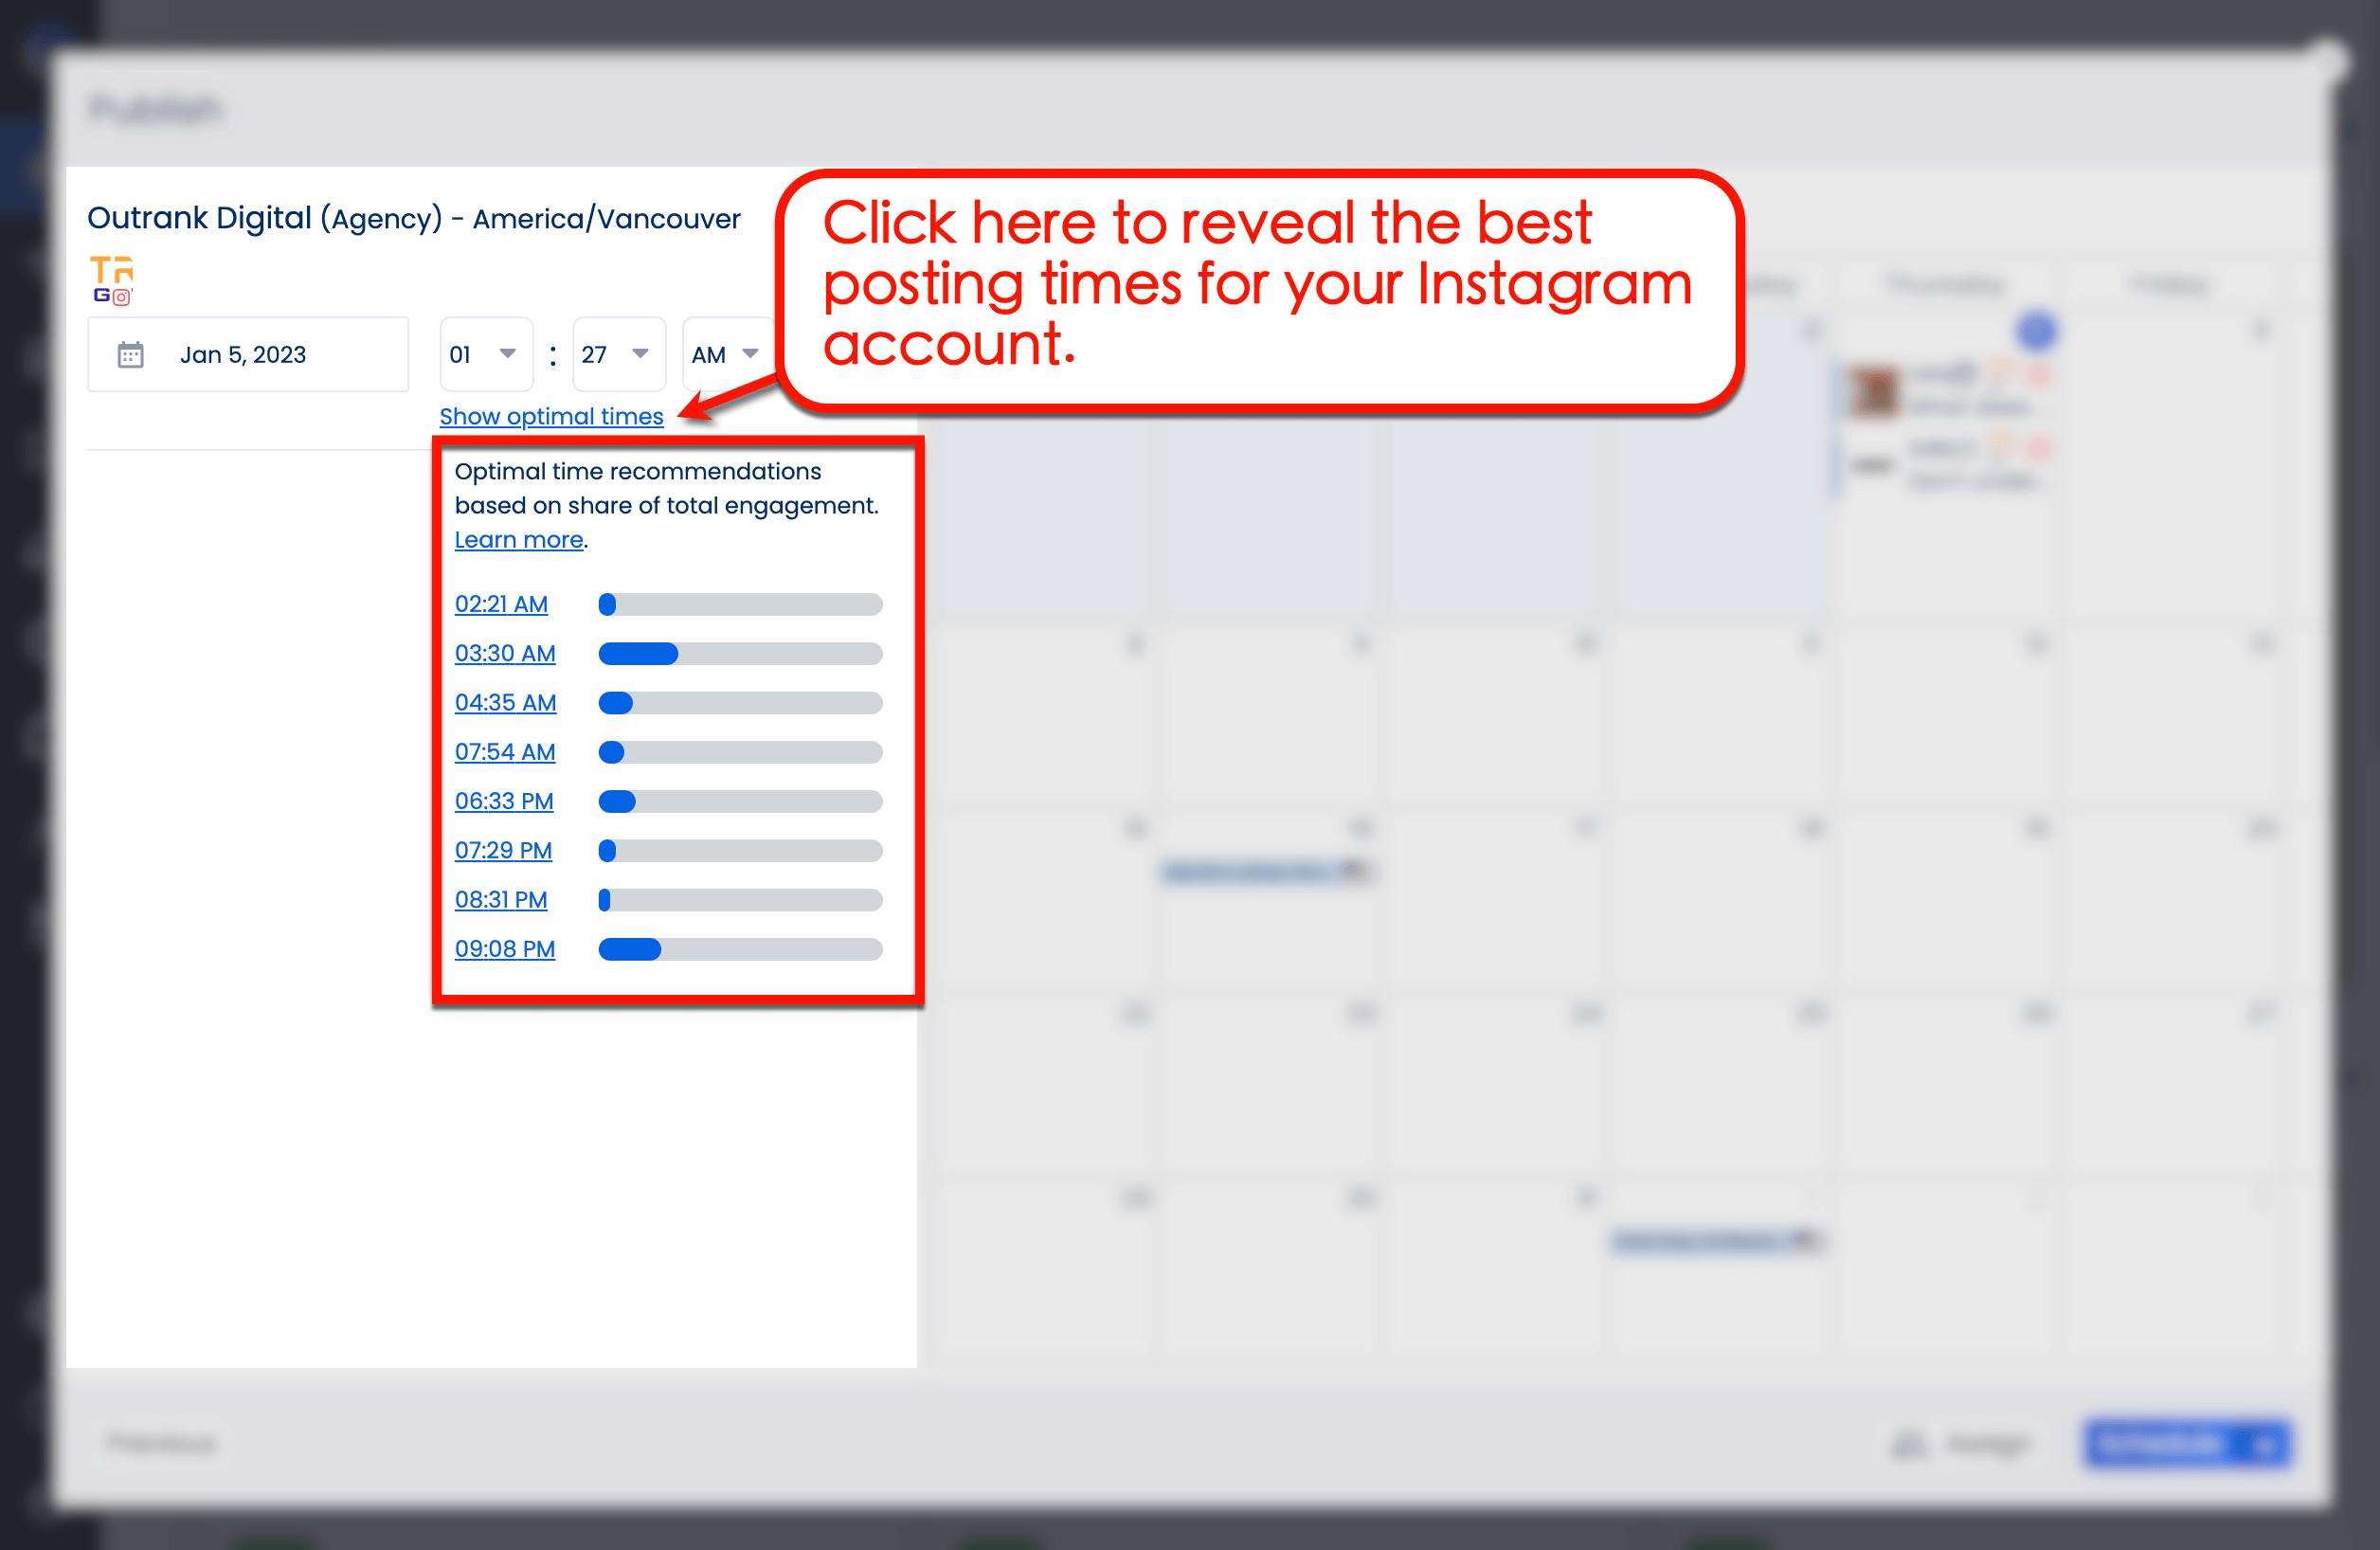 Select the posting time you want to use.